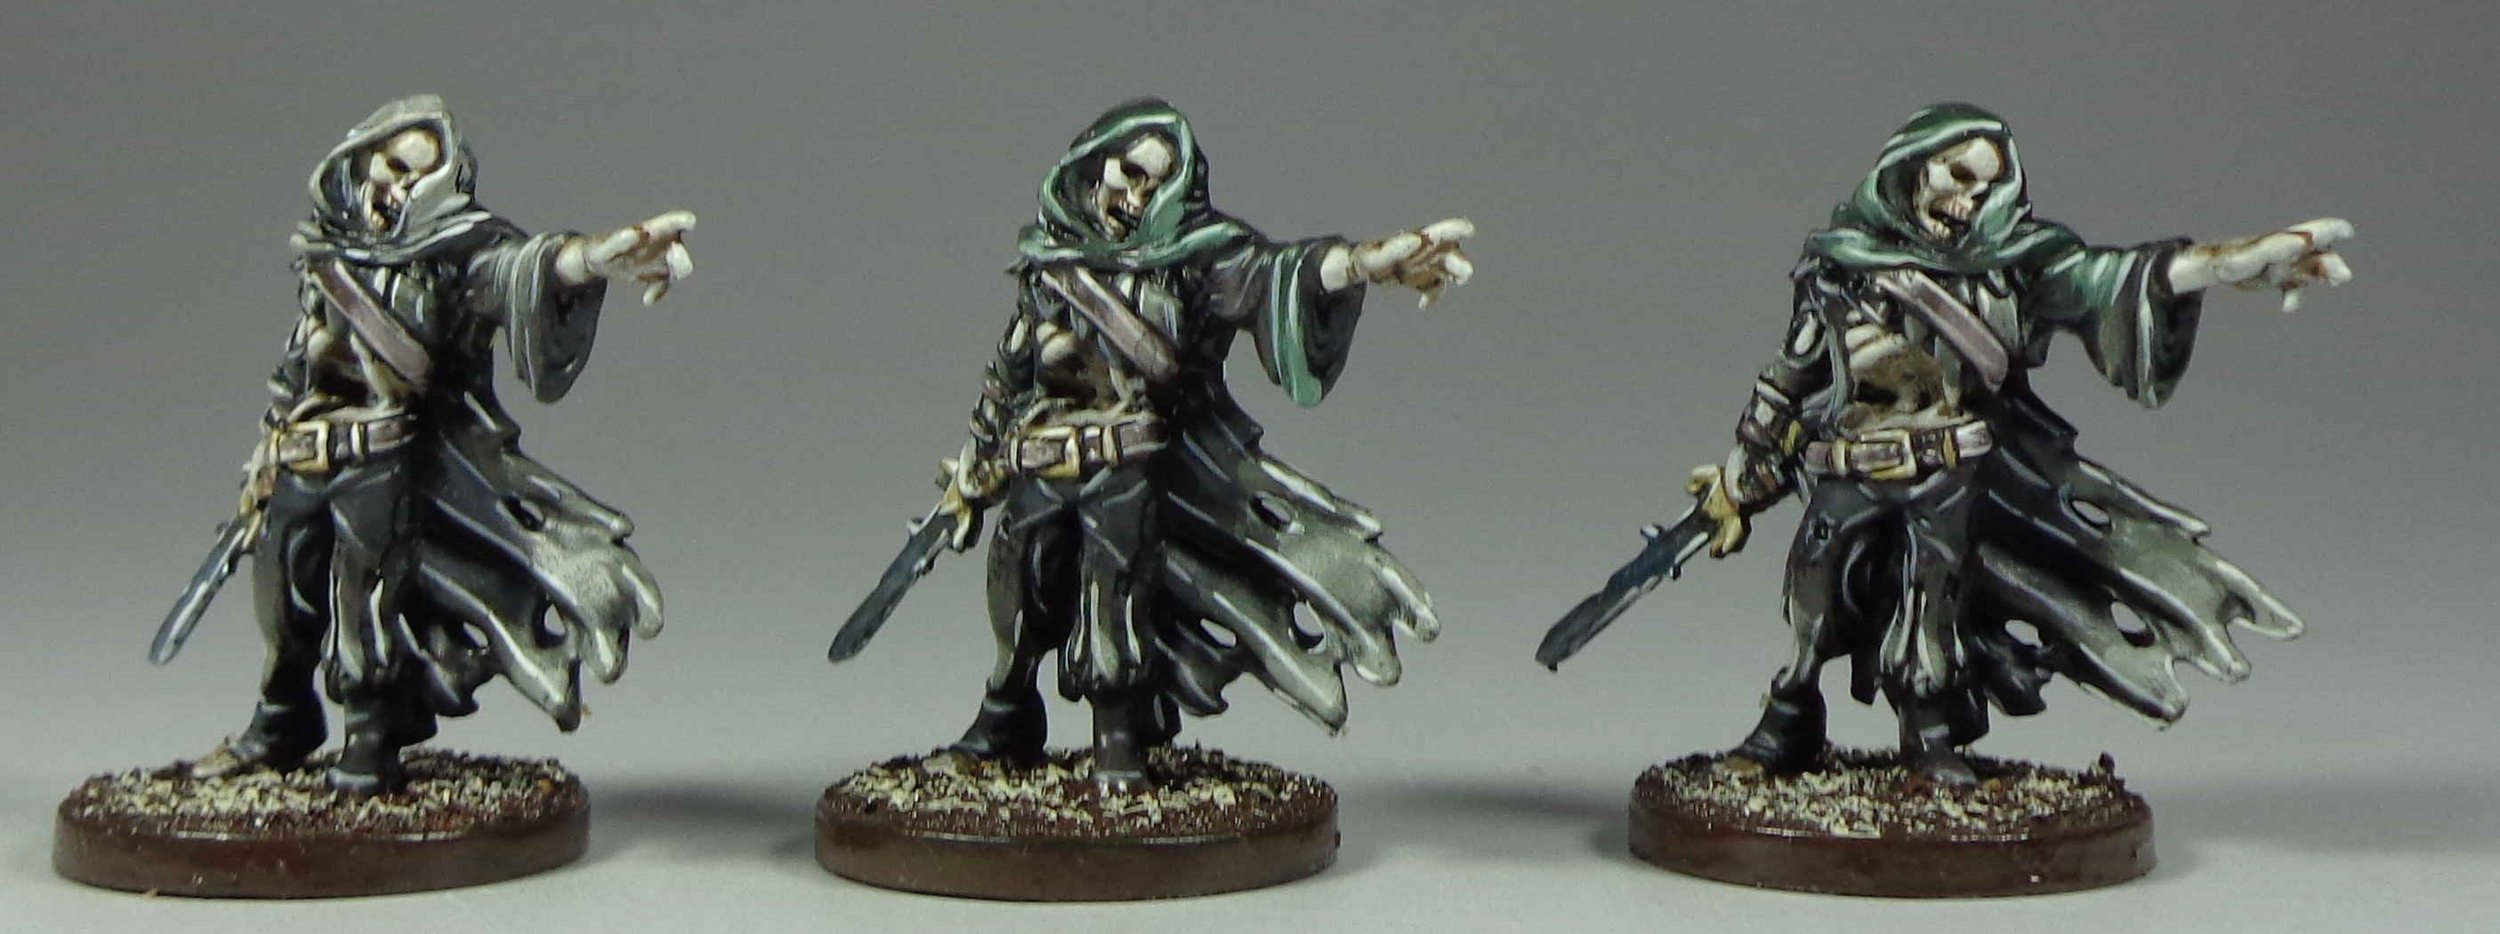 Journeys in Middle Earth Miniature Painting Service (2).jpg